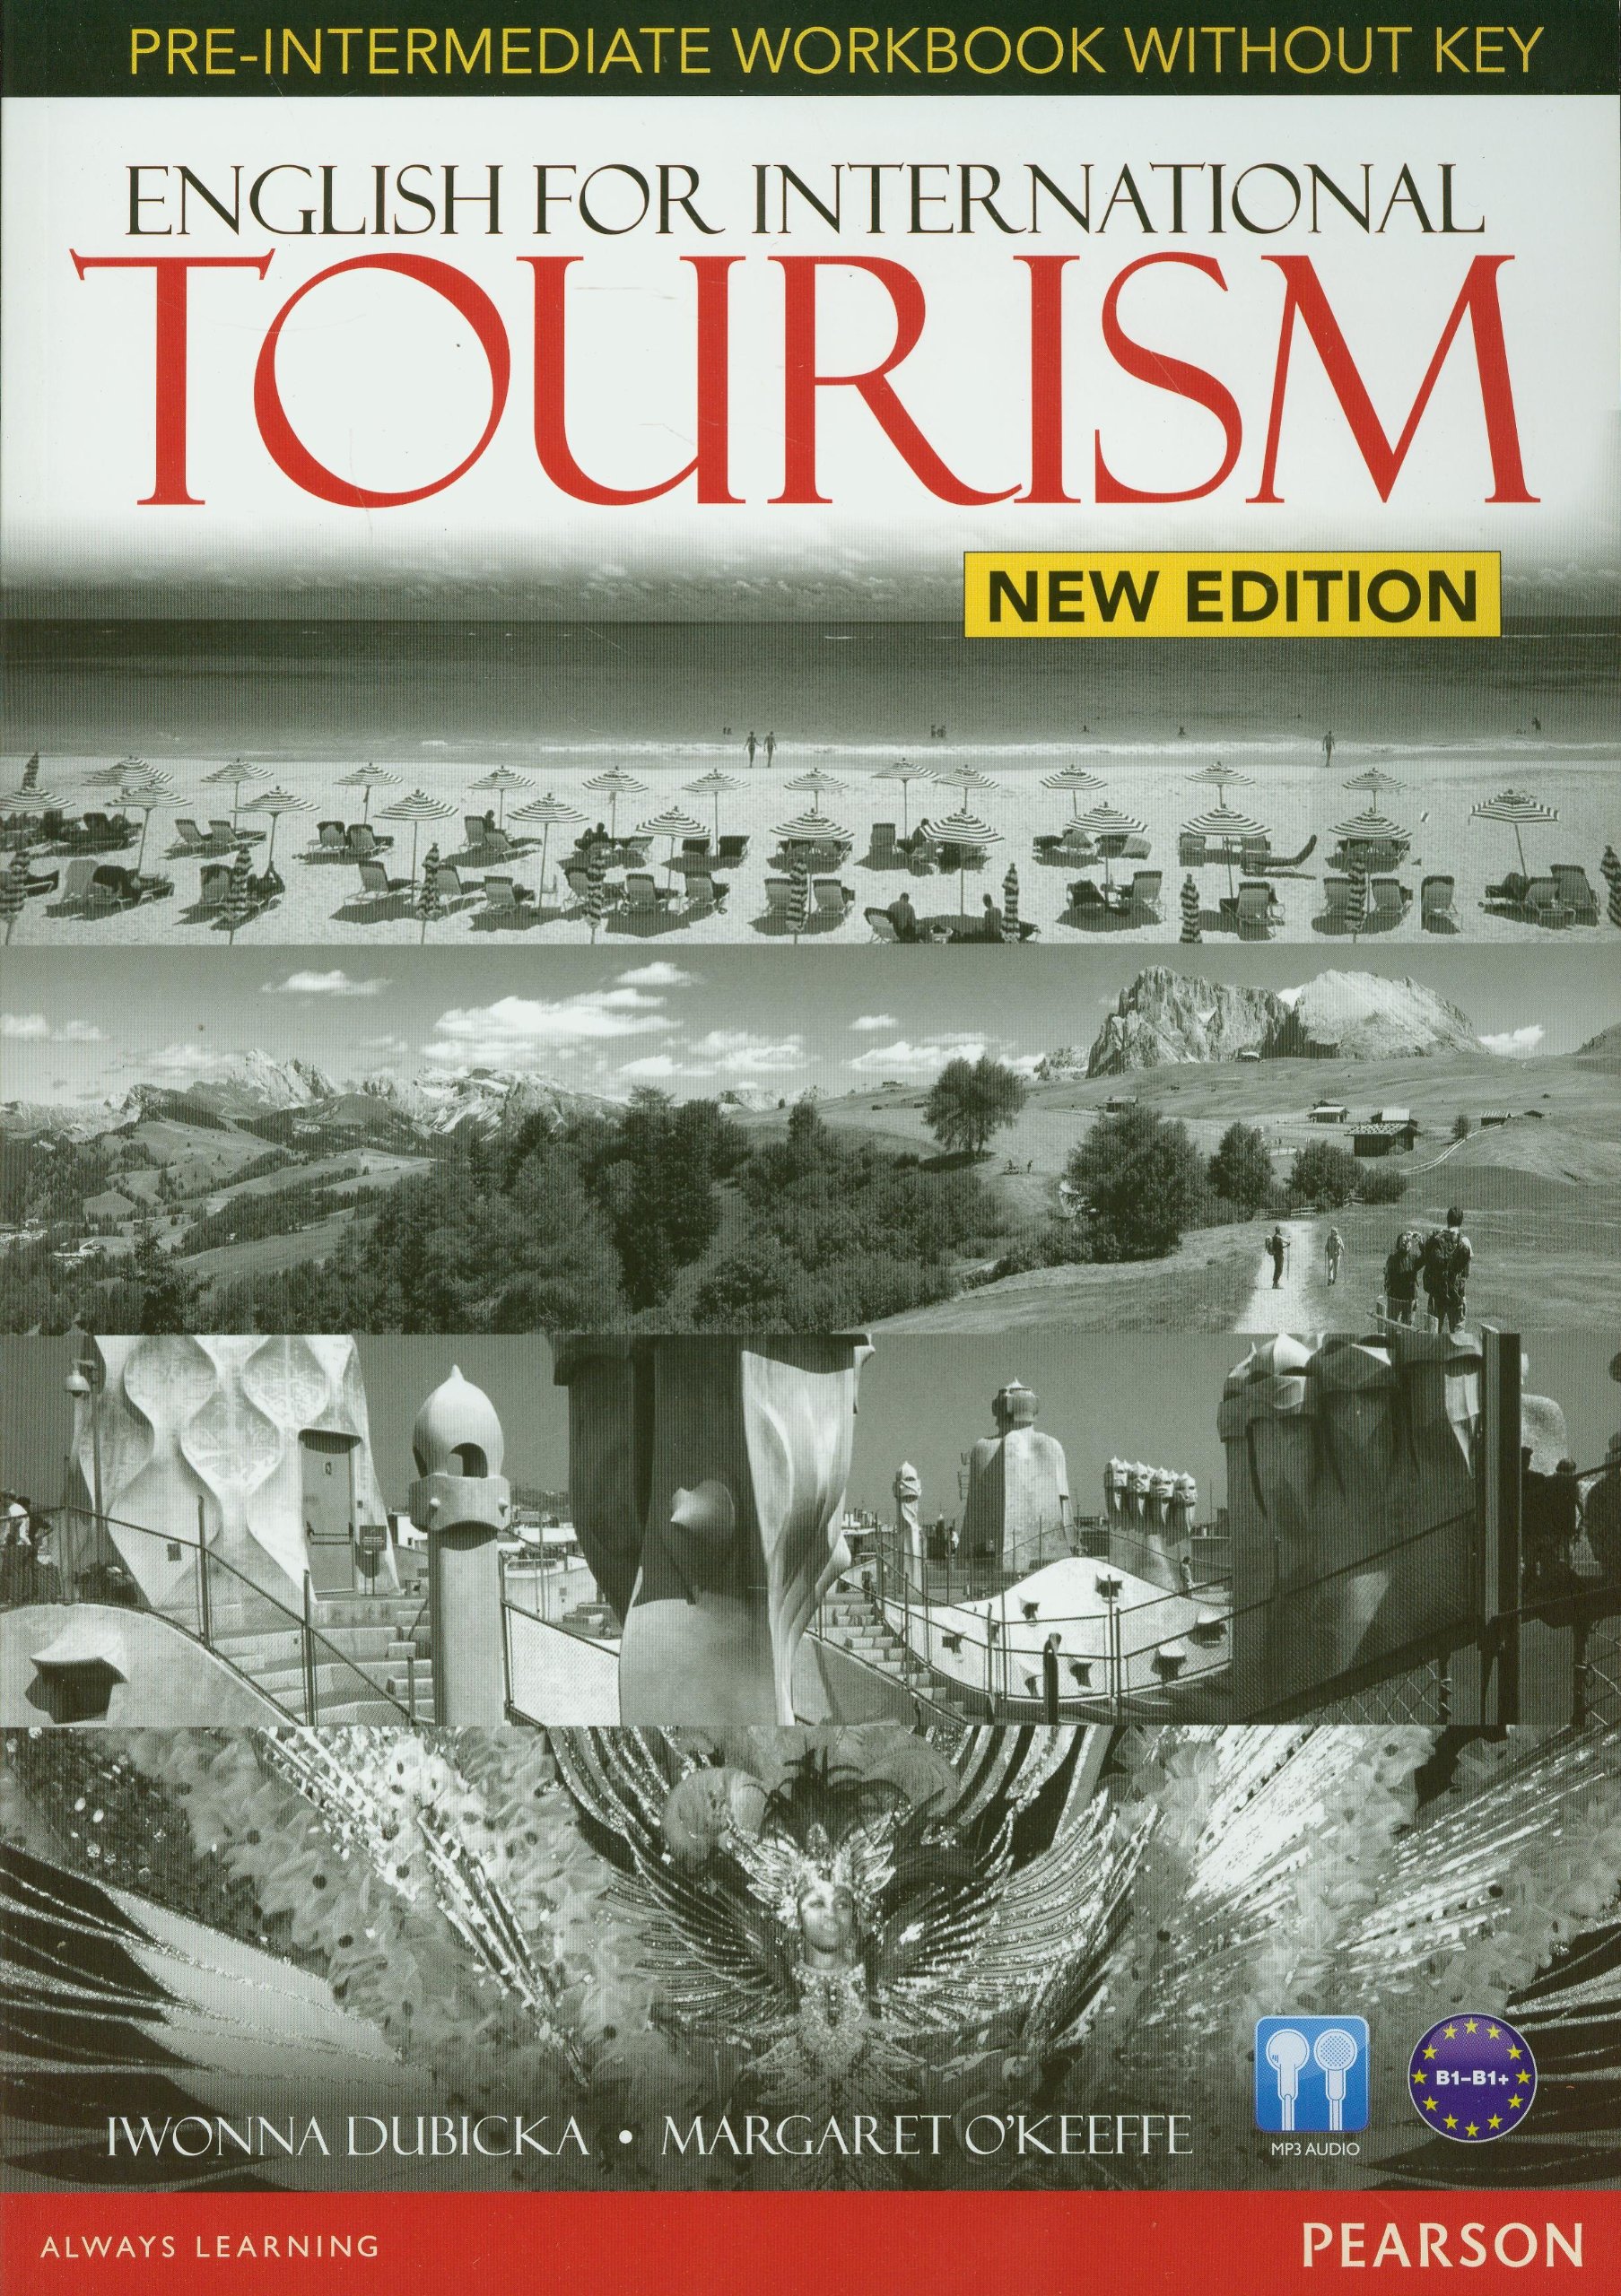 ENGLISH FOR INTERNATIONAL TOURISM New ED PRE-INTERMEDIATE Workbook without Answers + Audio CD